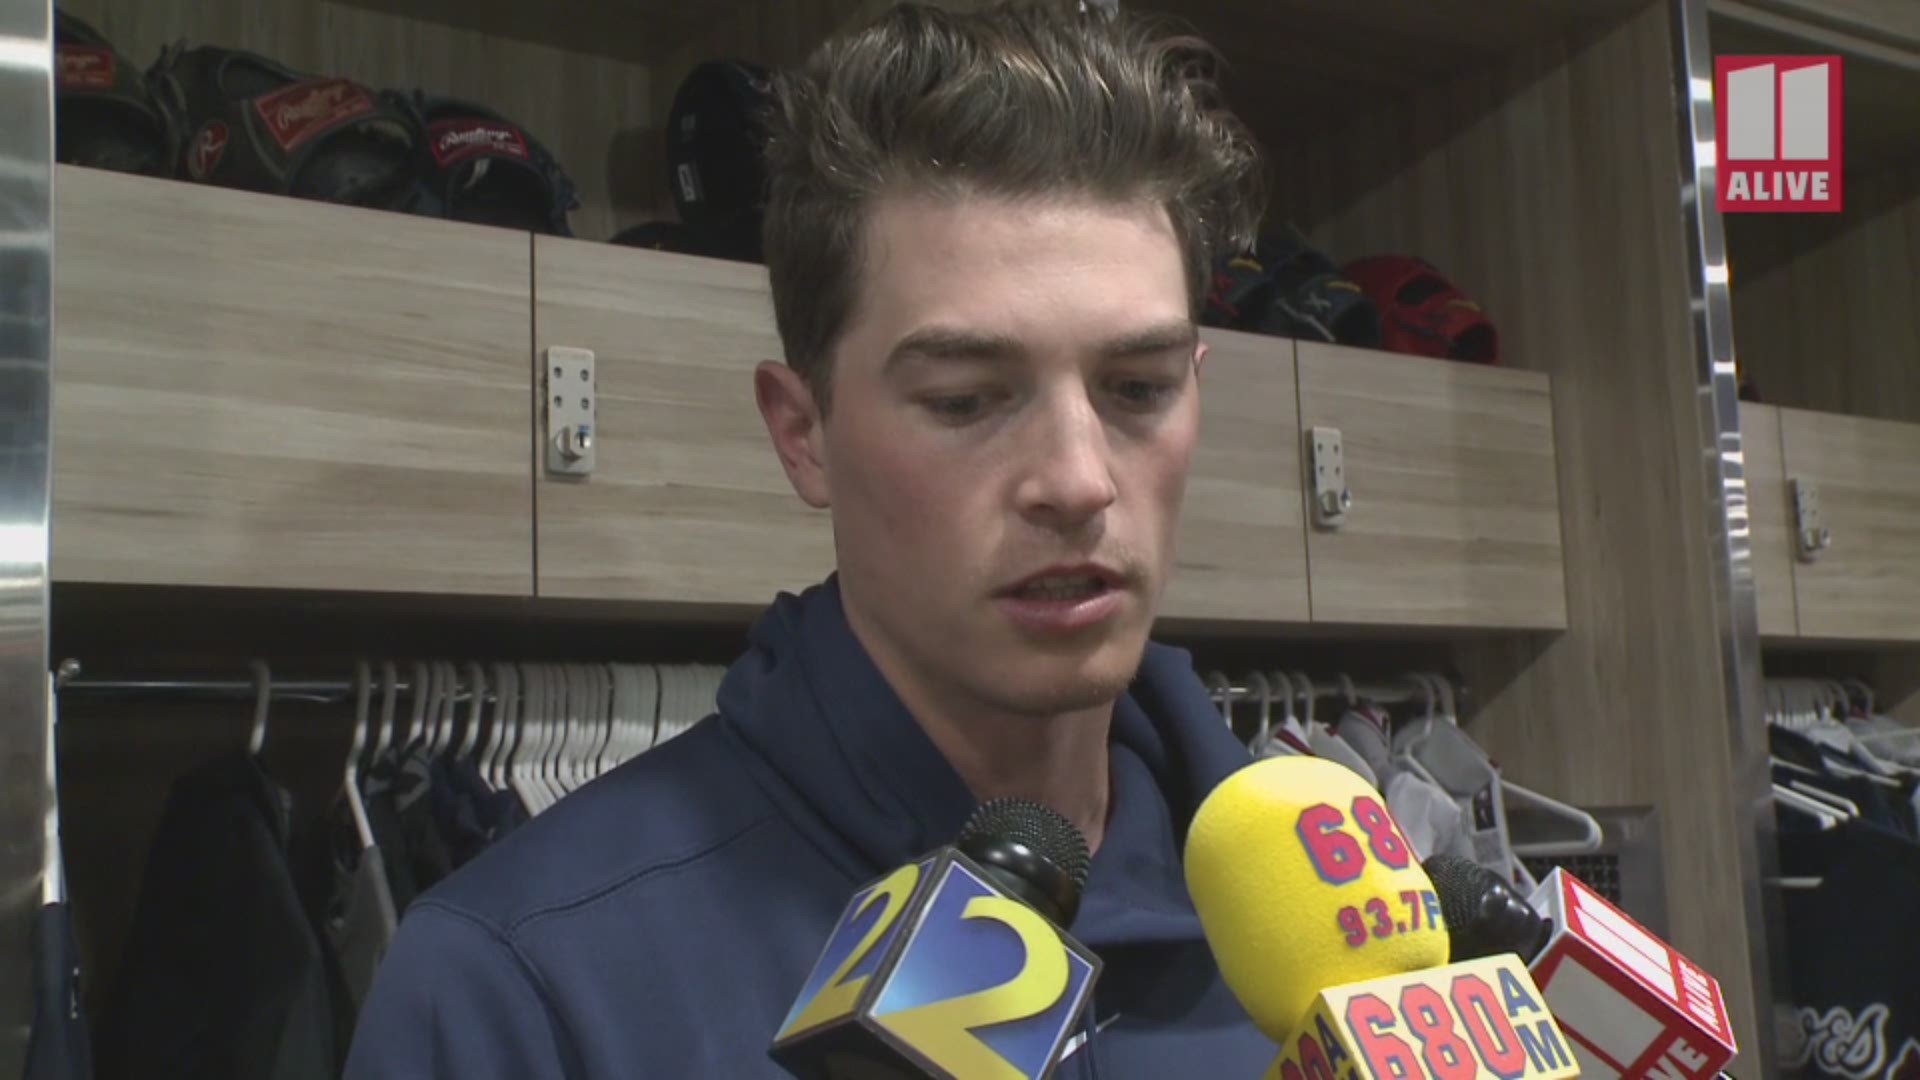 Braves left-handed pitcher Max Fried told 11Alive's Maria Martin how he wants to push for the next step this season as part of his expectations for the 2020 season.